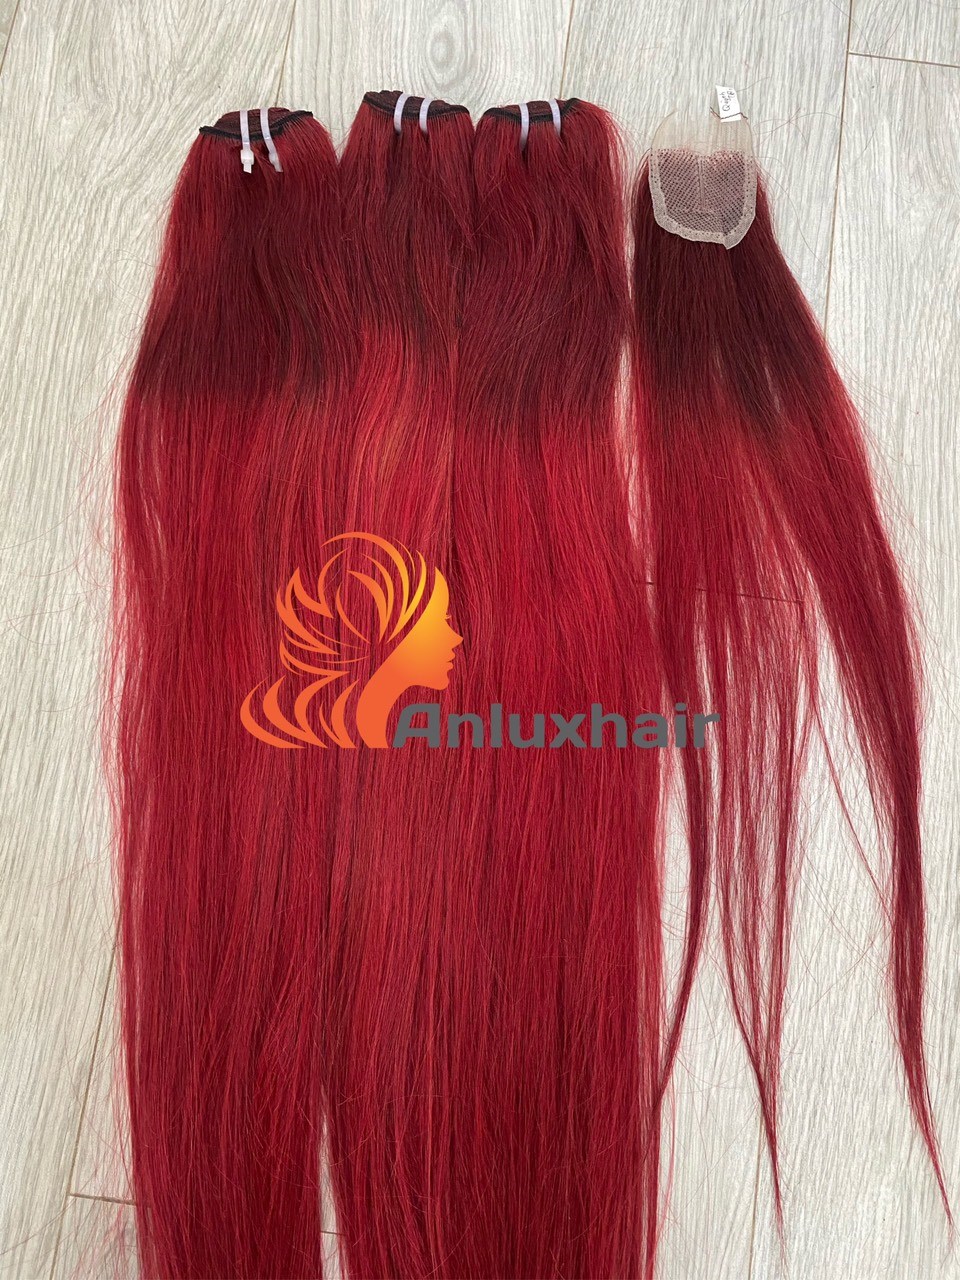 Display detials for COLOR HAIR 04